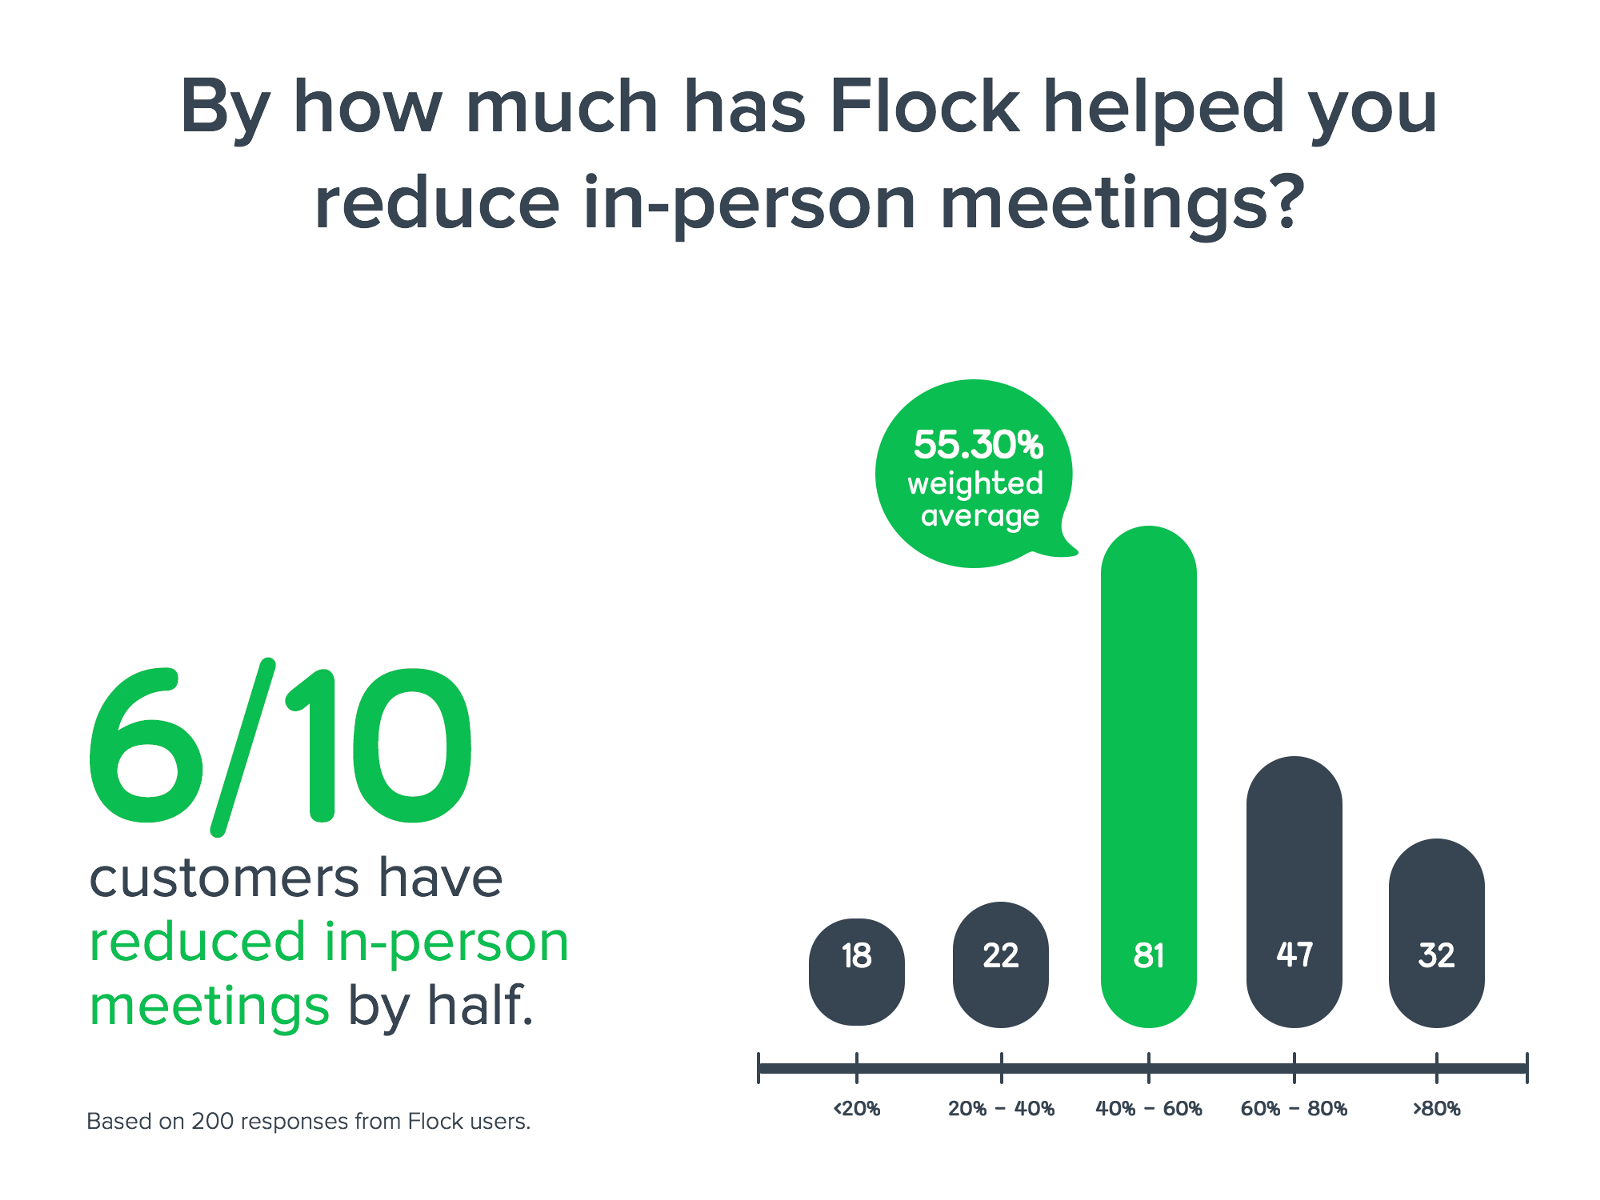 Graphic: 6/10 customers have reduced in-person meetings by half using Flock.